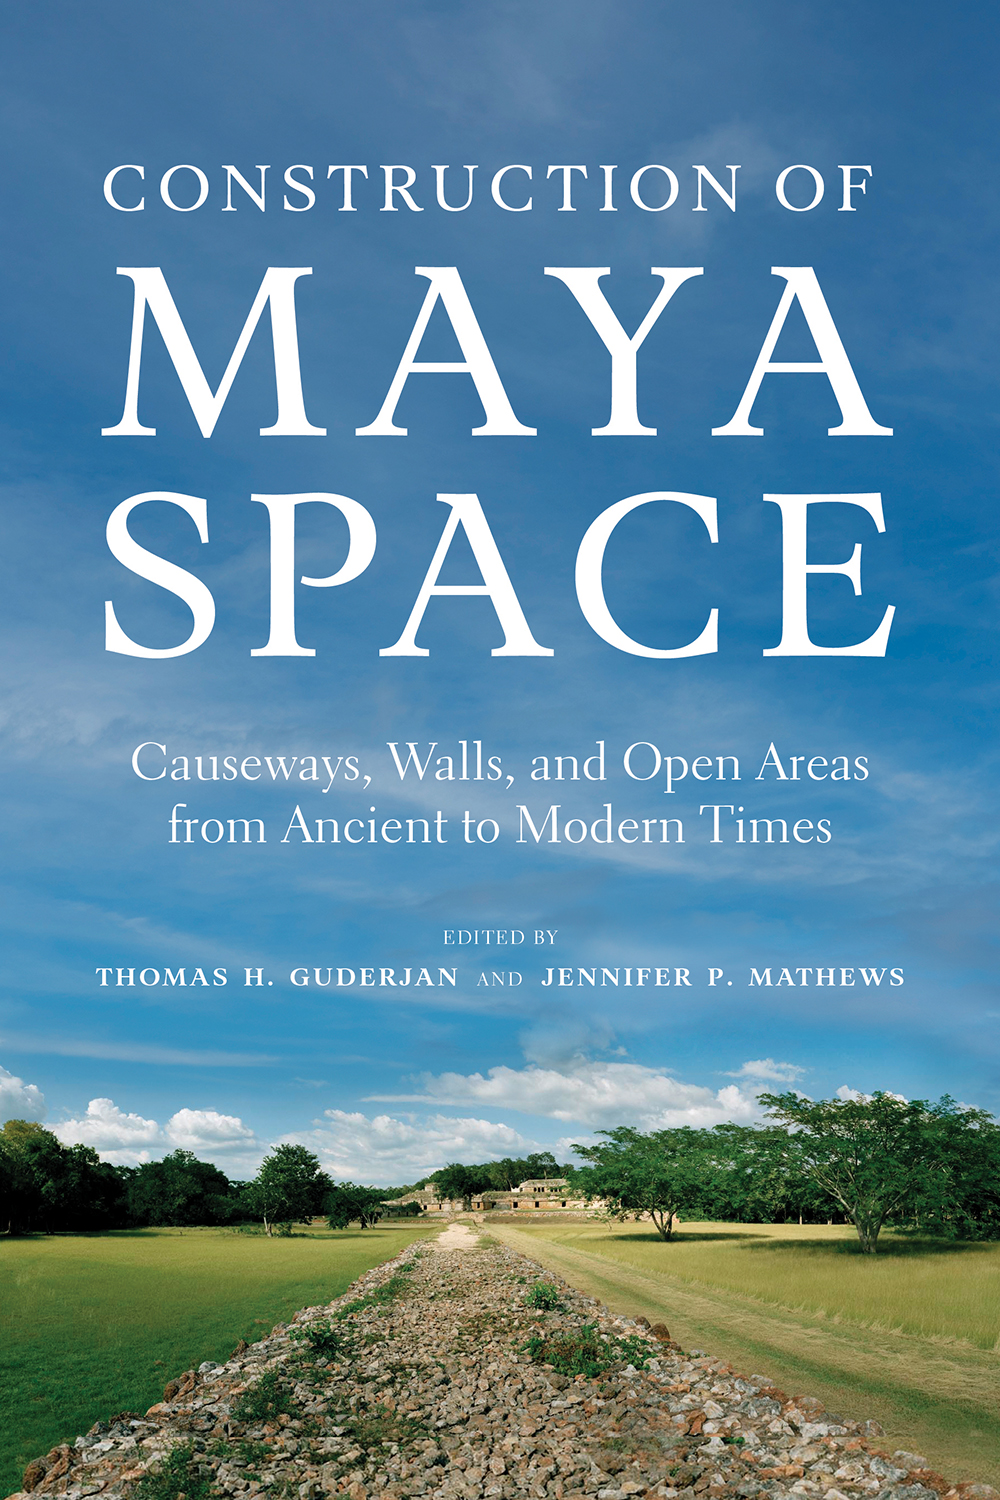 Excerpt from “Construction of Maya Space”